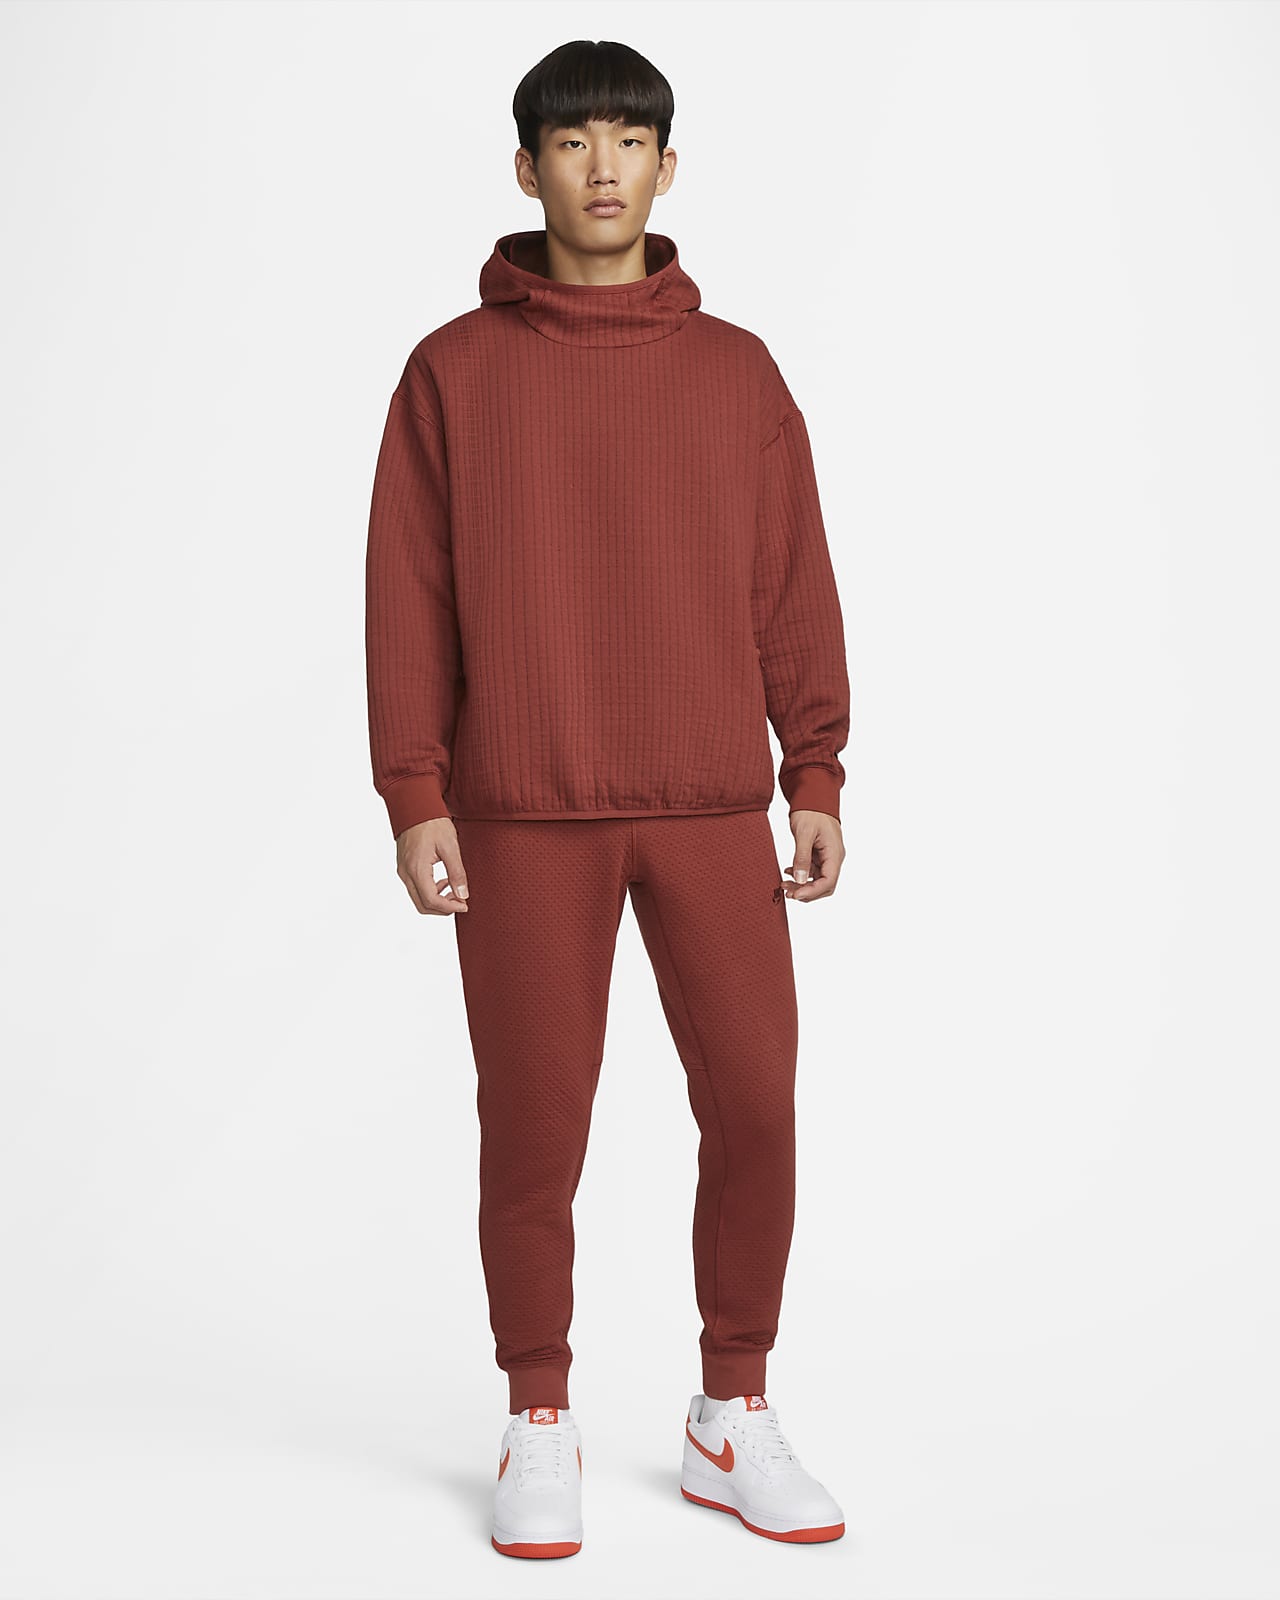 Therma-FIT Pullover. ADV Nike Pack Sportswear Tech Engineered